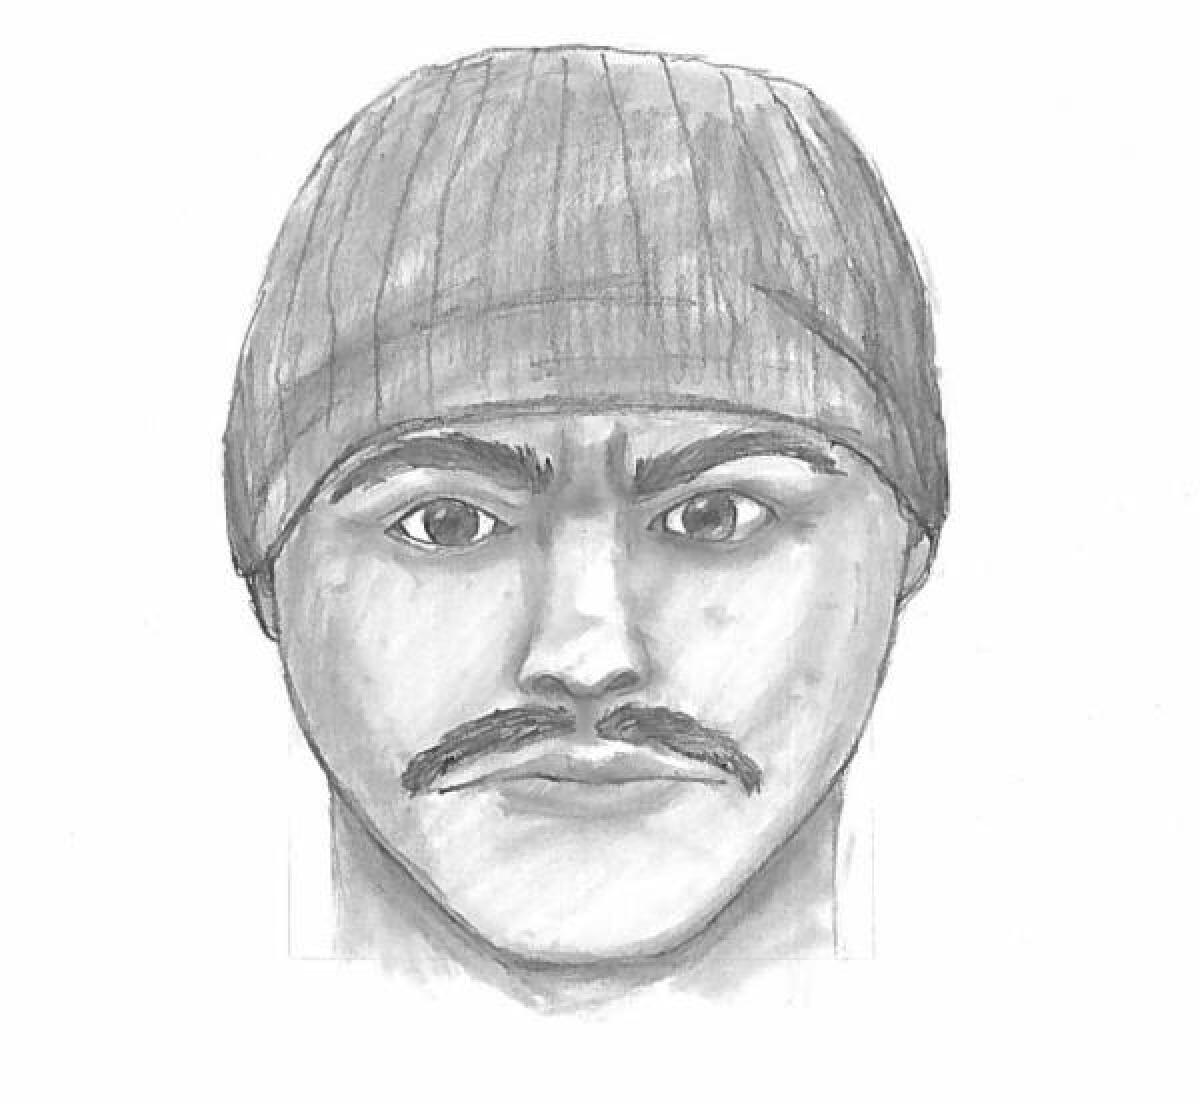 The San Diego County Sheriff's Department provided a sketch of a suspect in an attempted robbery Friday night in Santee.